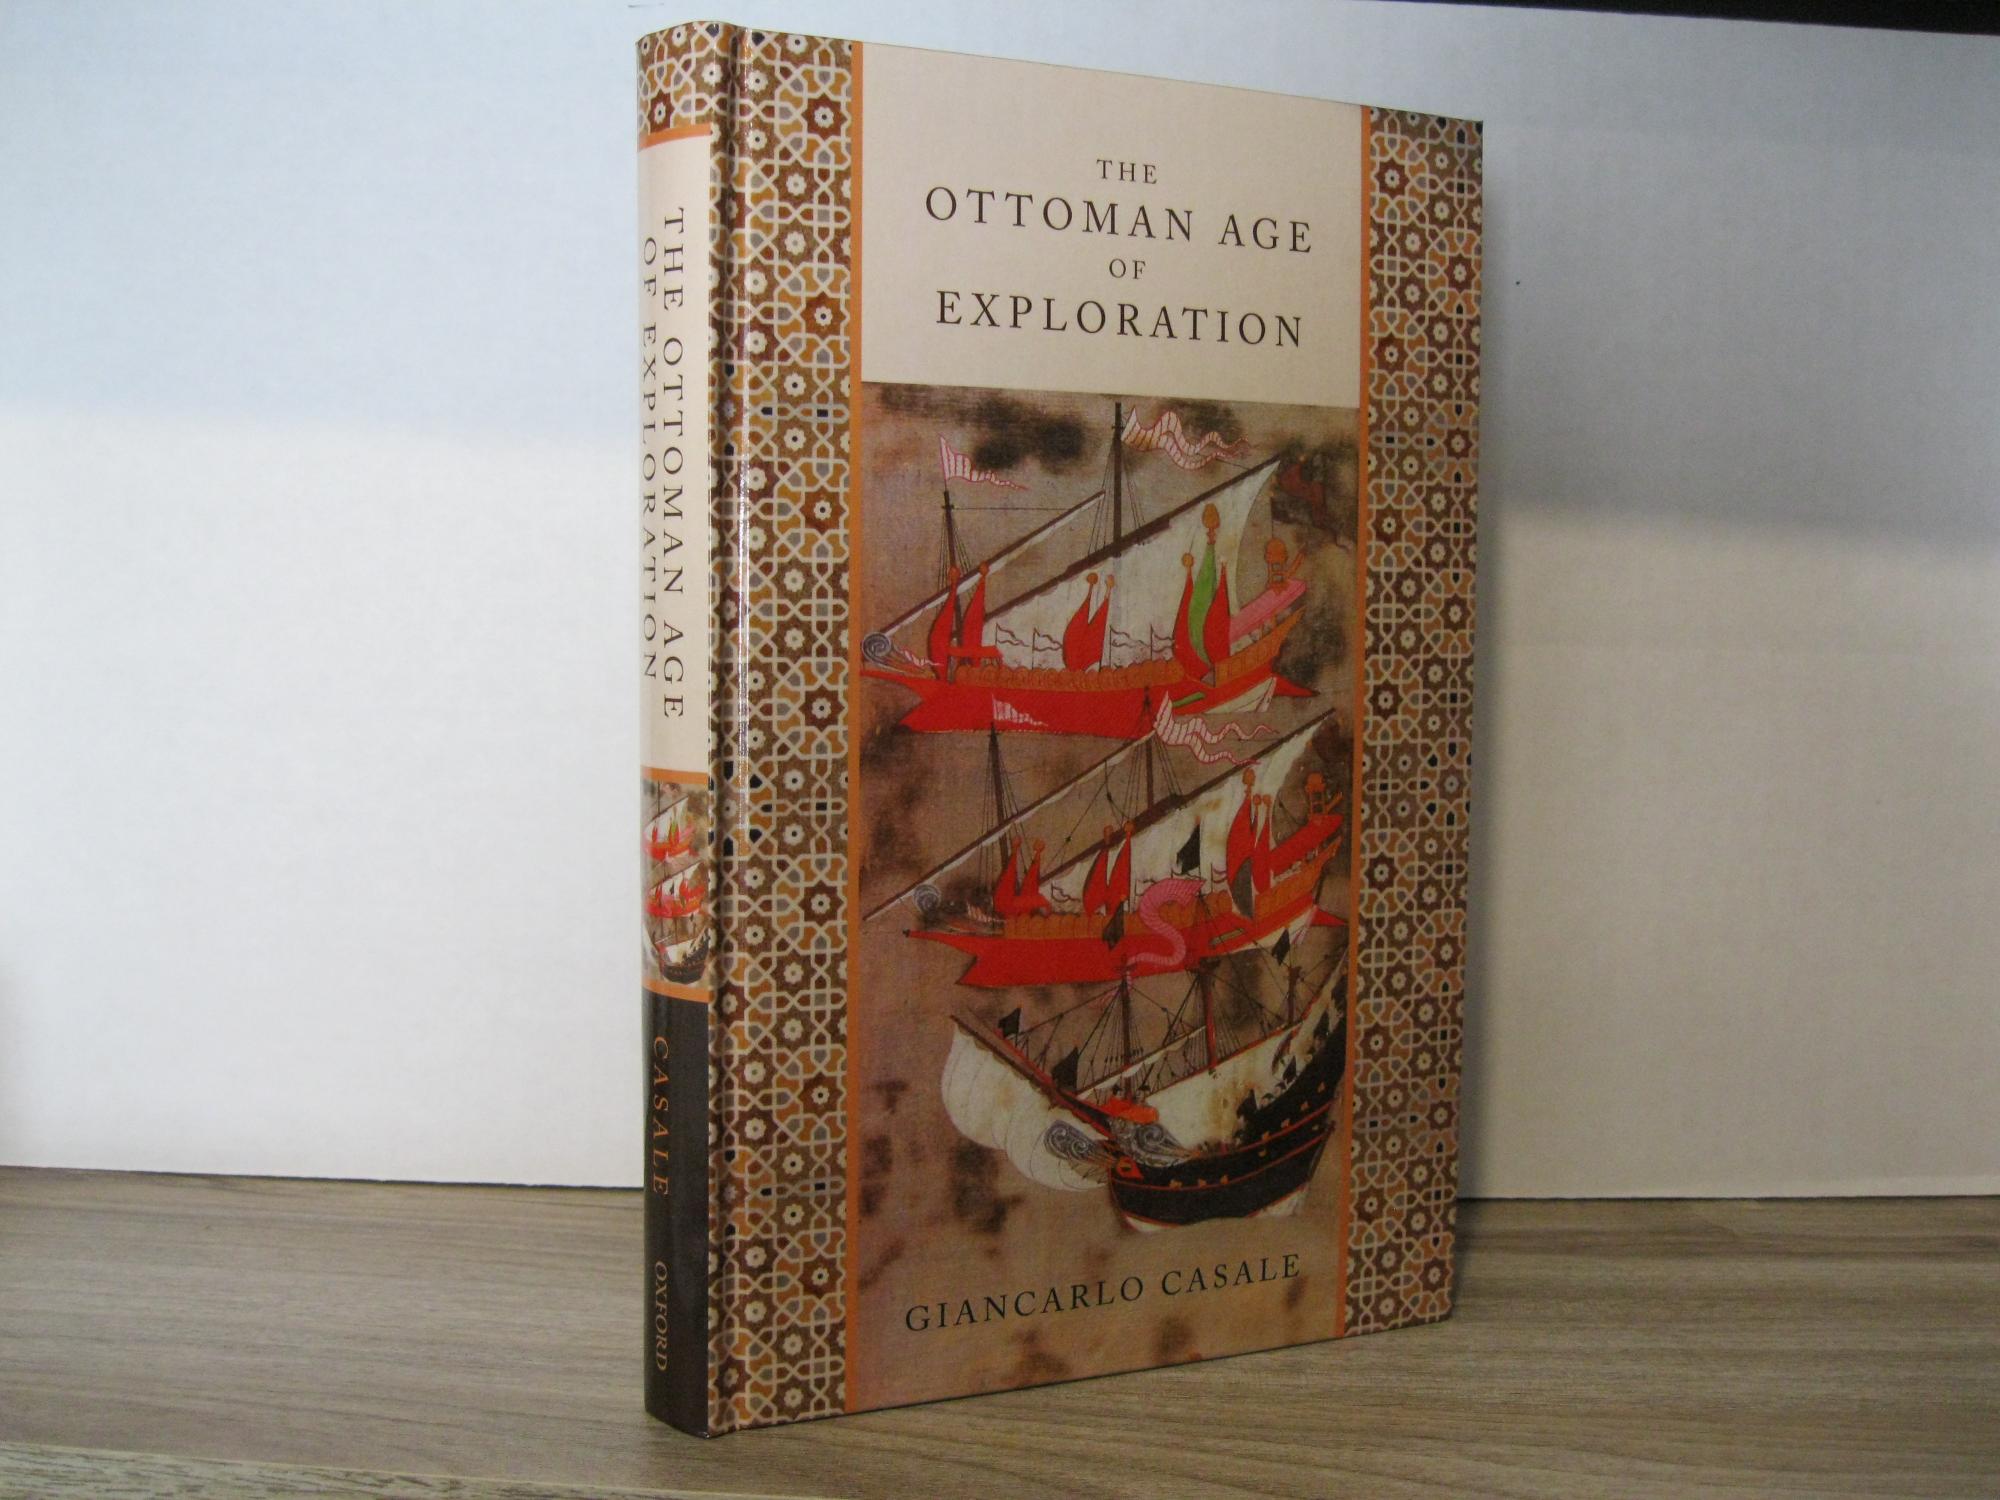 The Ottoman Age of Exploration by Giancarlo Casale